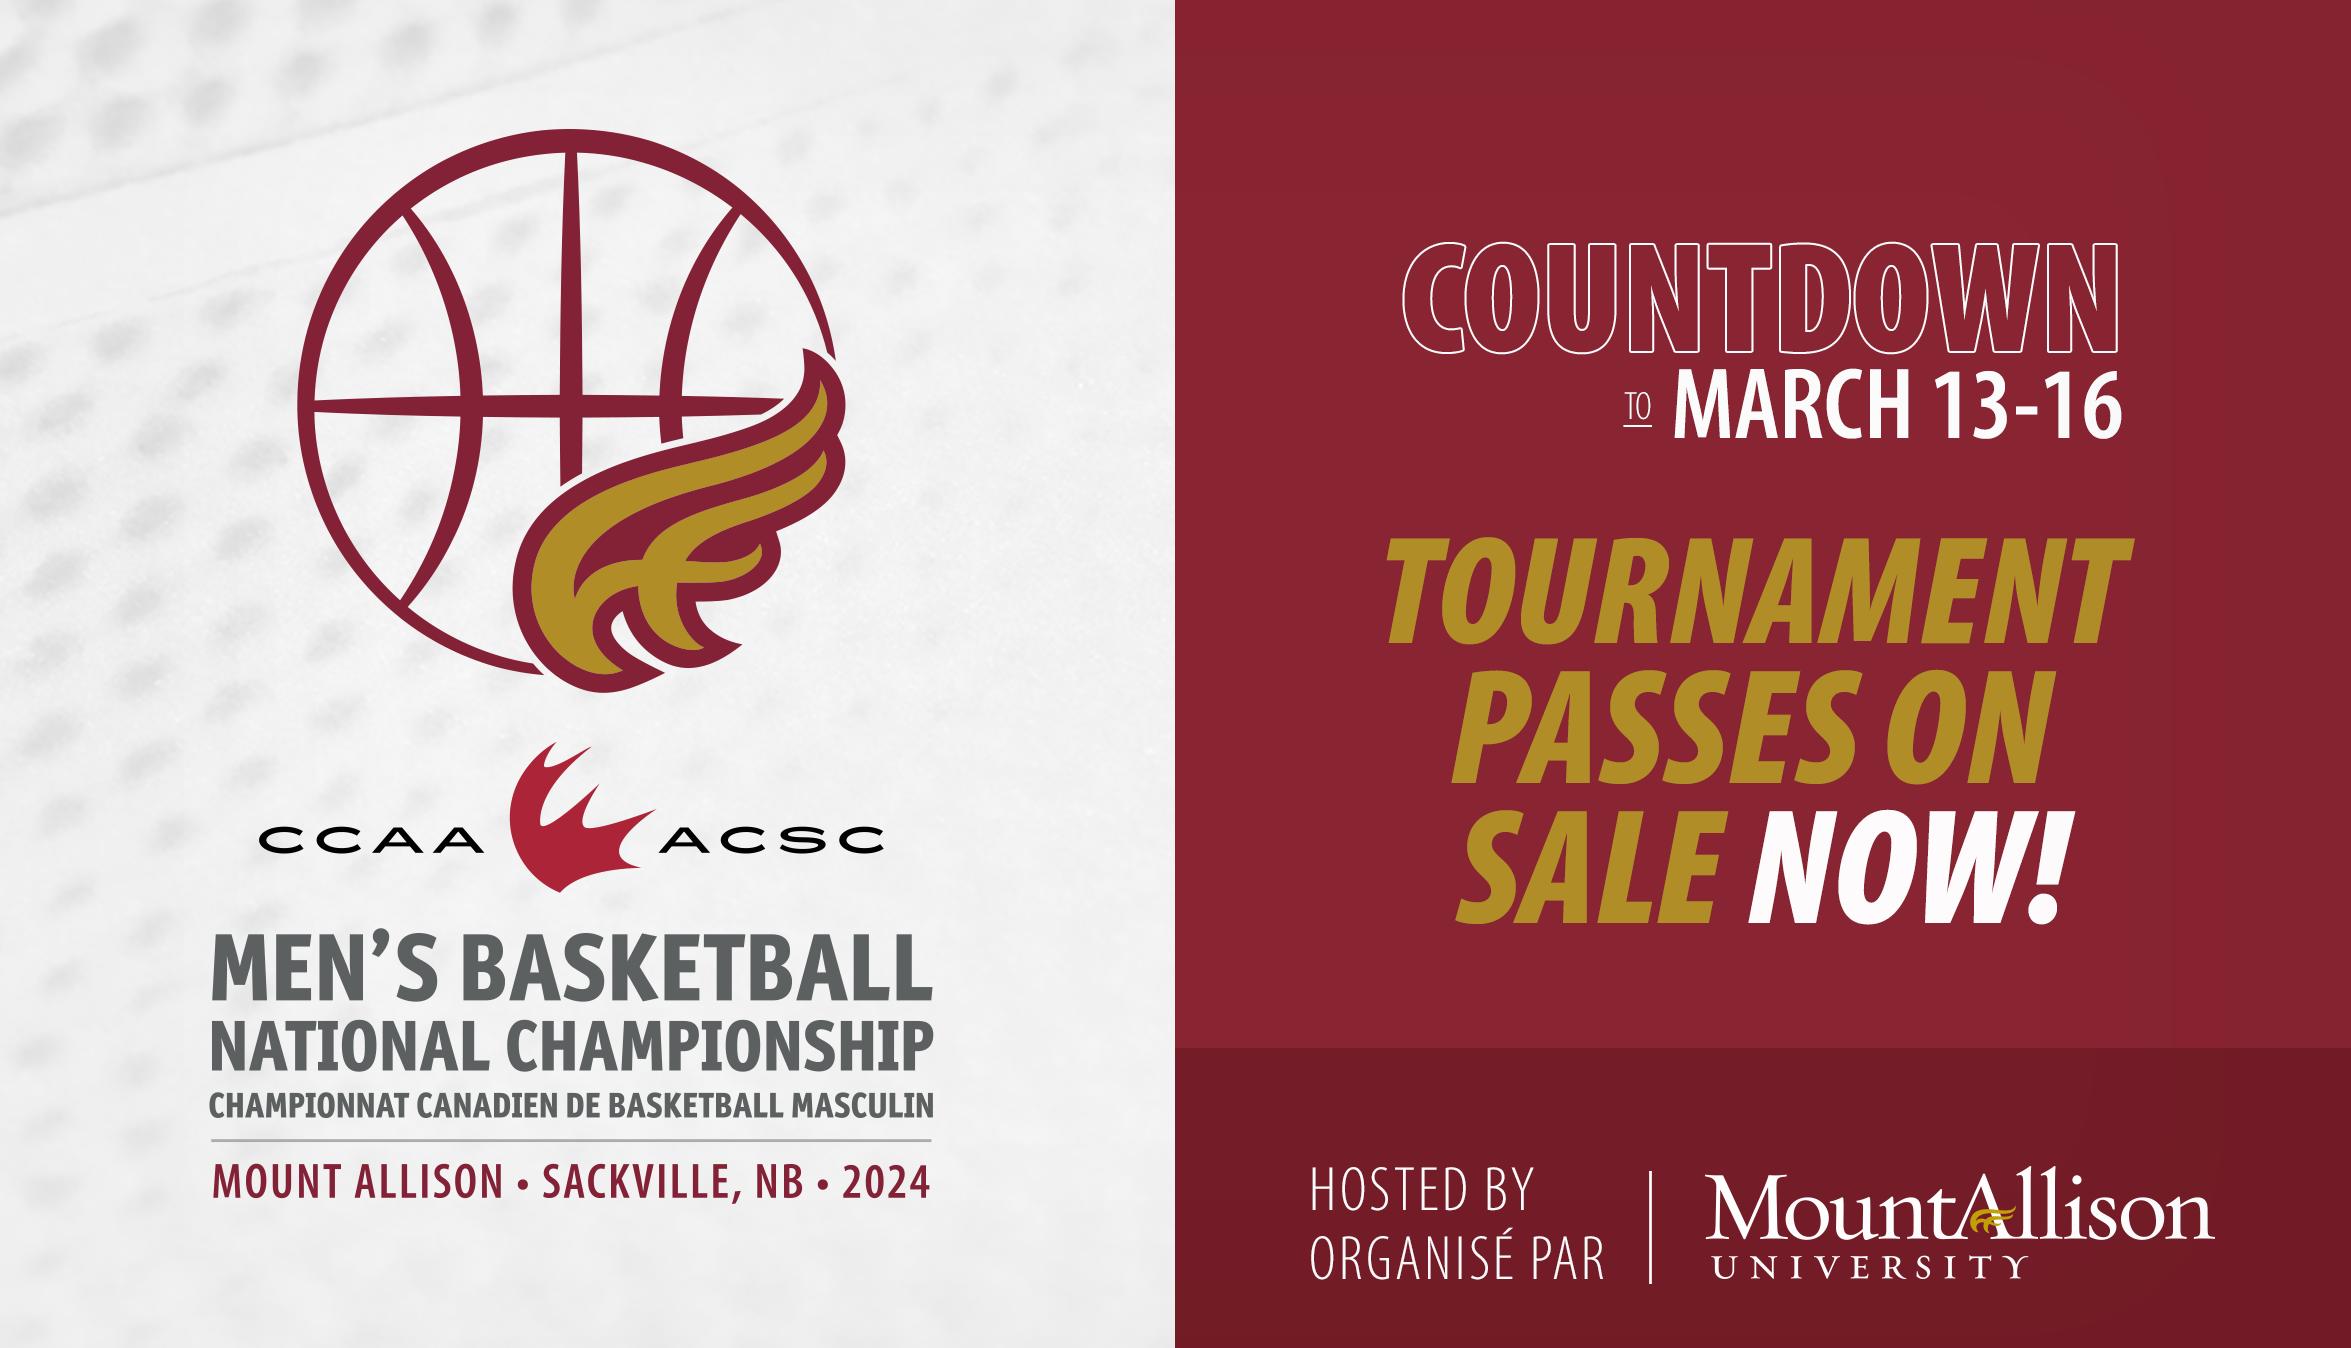 2024 CCAA Men's Basketball National Championship - Tournament passes on sale now!